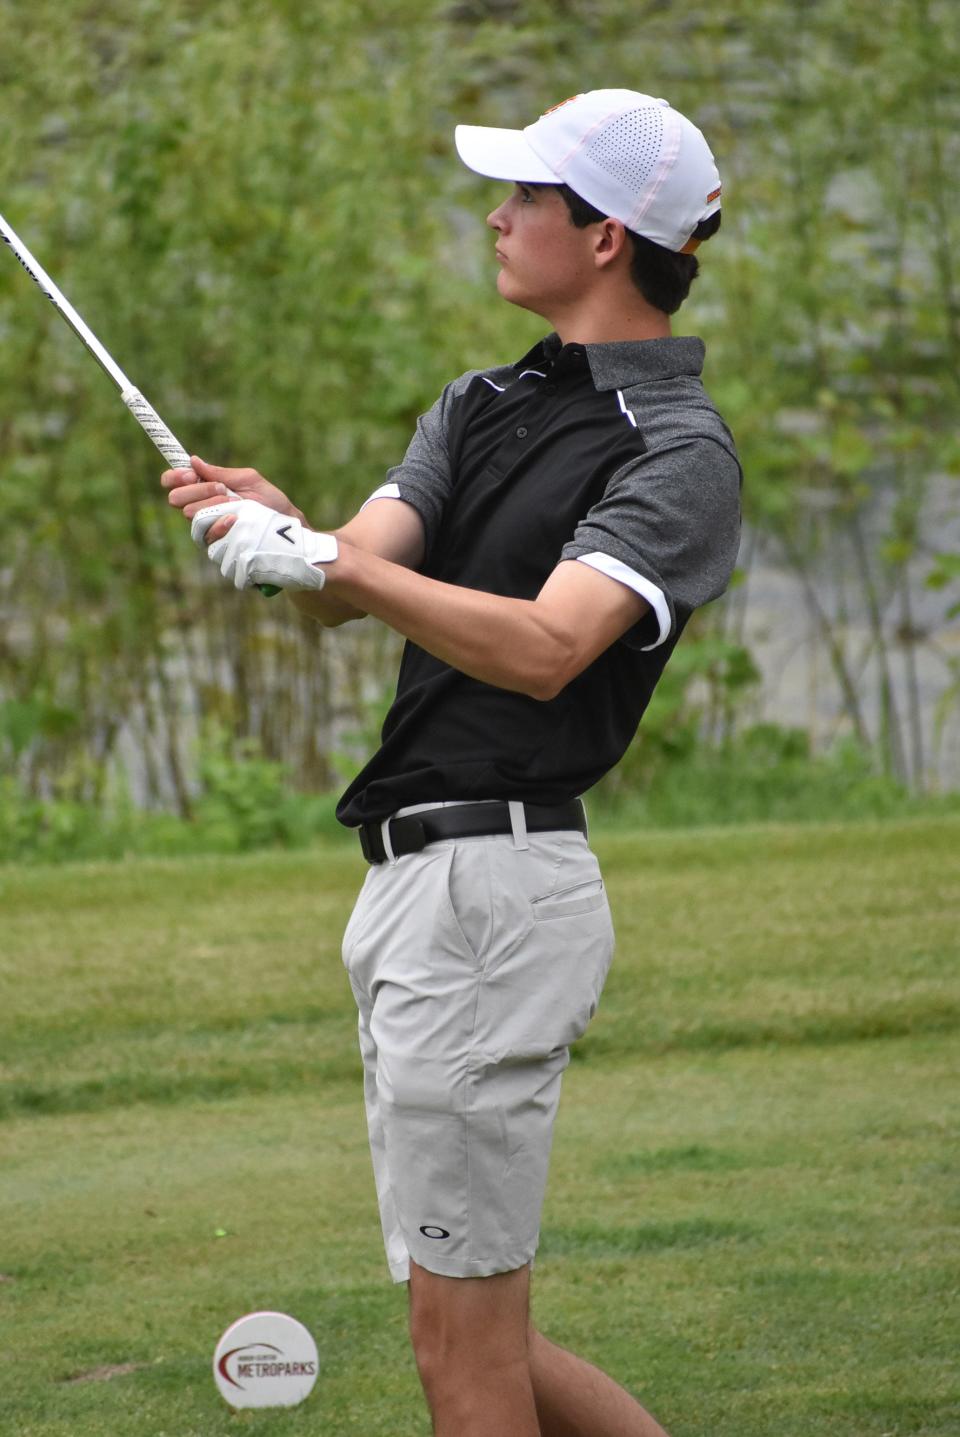 Brighton's Andrew Daily shot 1-under-par 71 in the first round of the state Division 1 golf tournament.